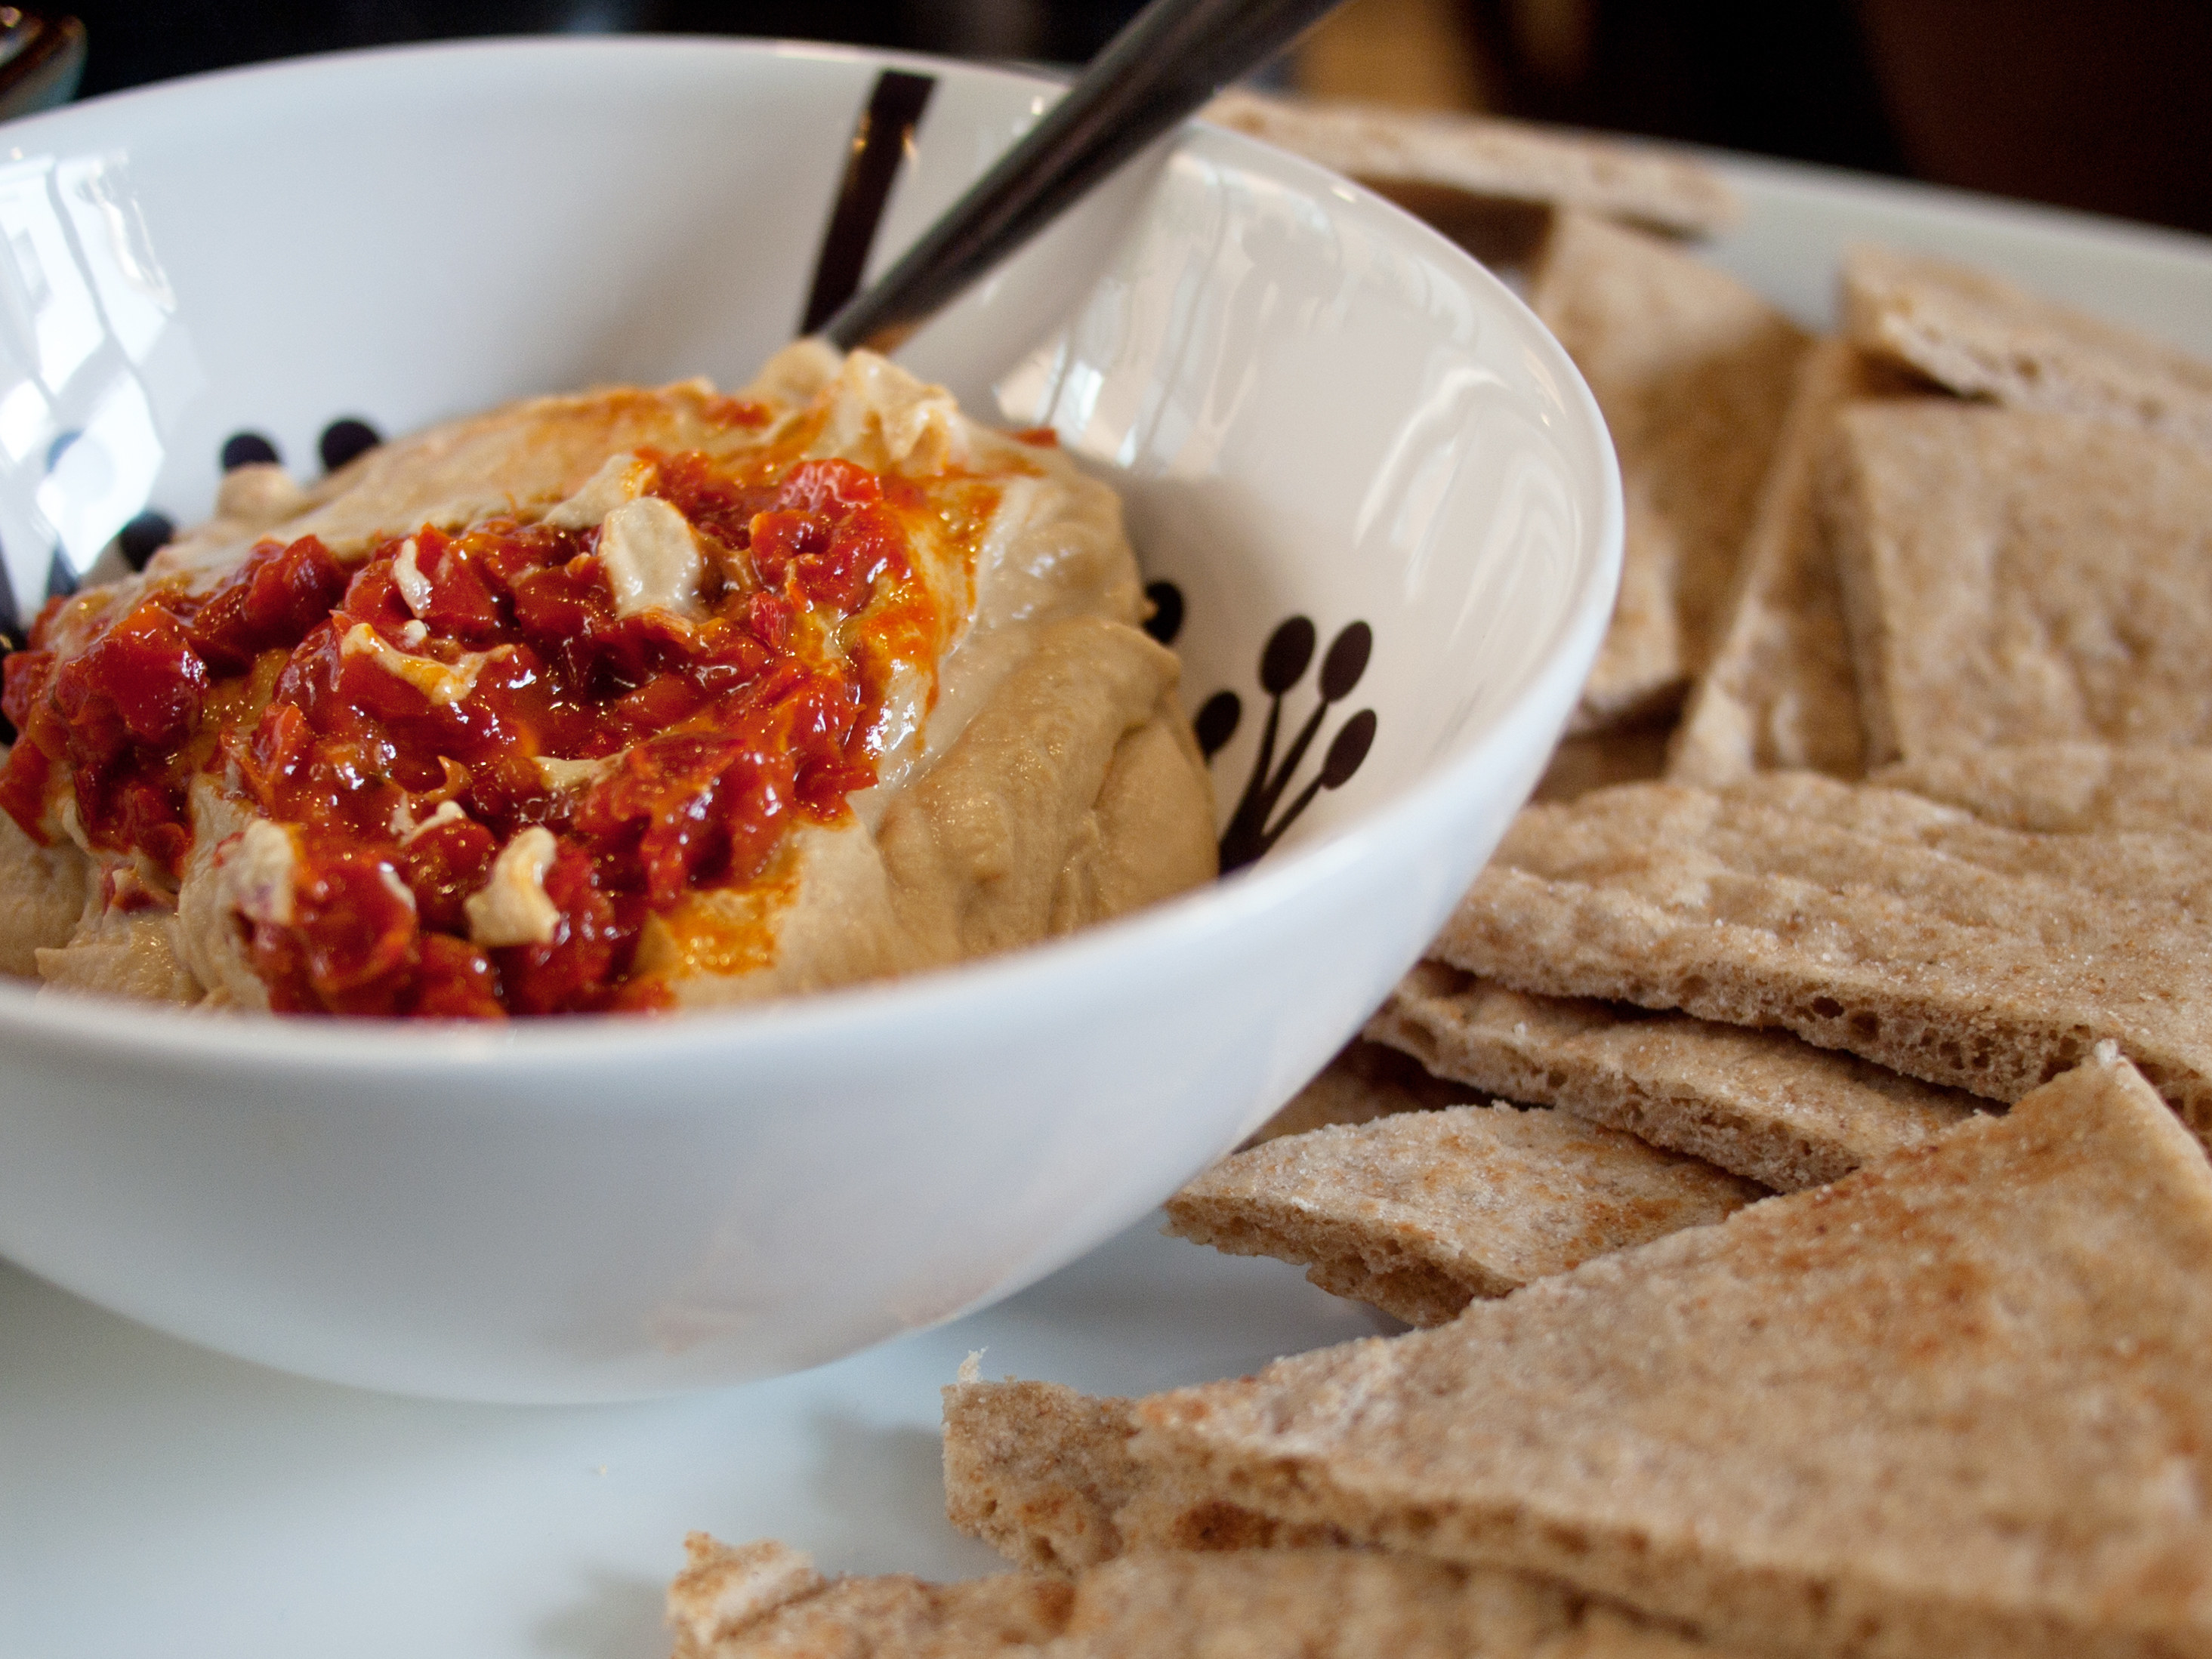 A bowl of spicy hummus and pita